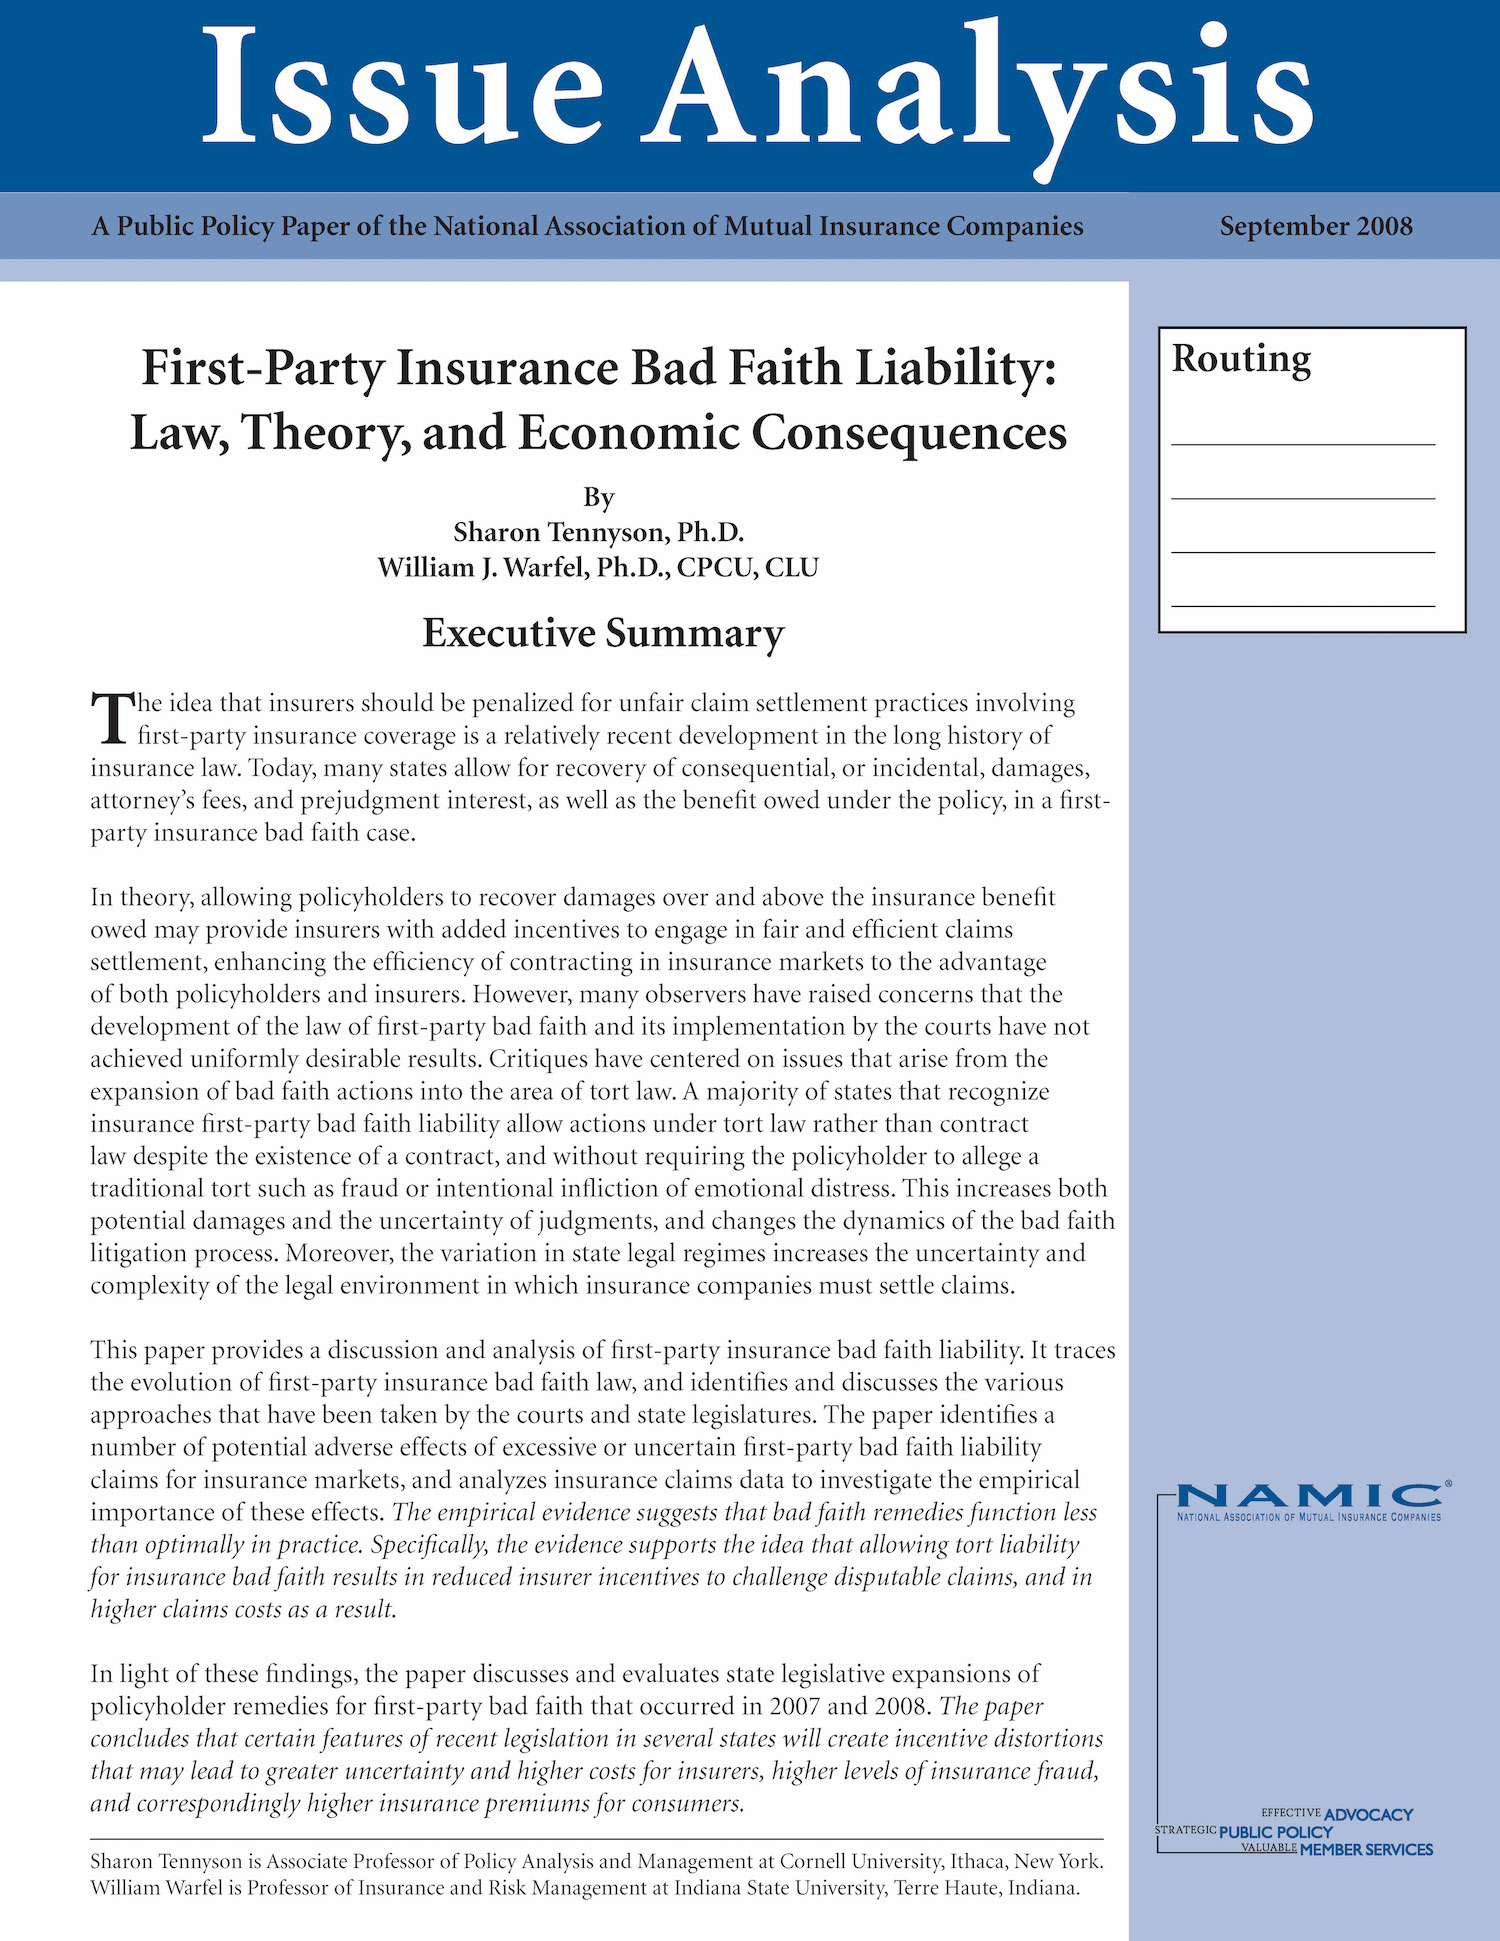 First-Party Insurance Bad Faith Liability: Law, Theory, and Economic Consequences PDF